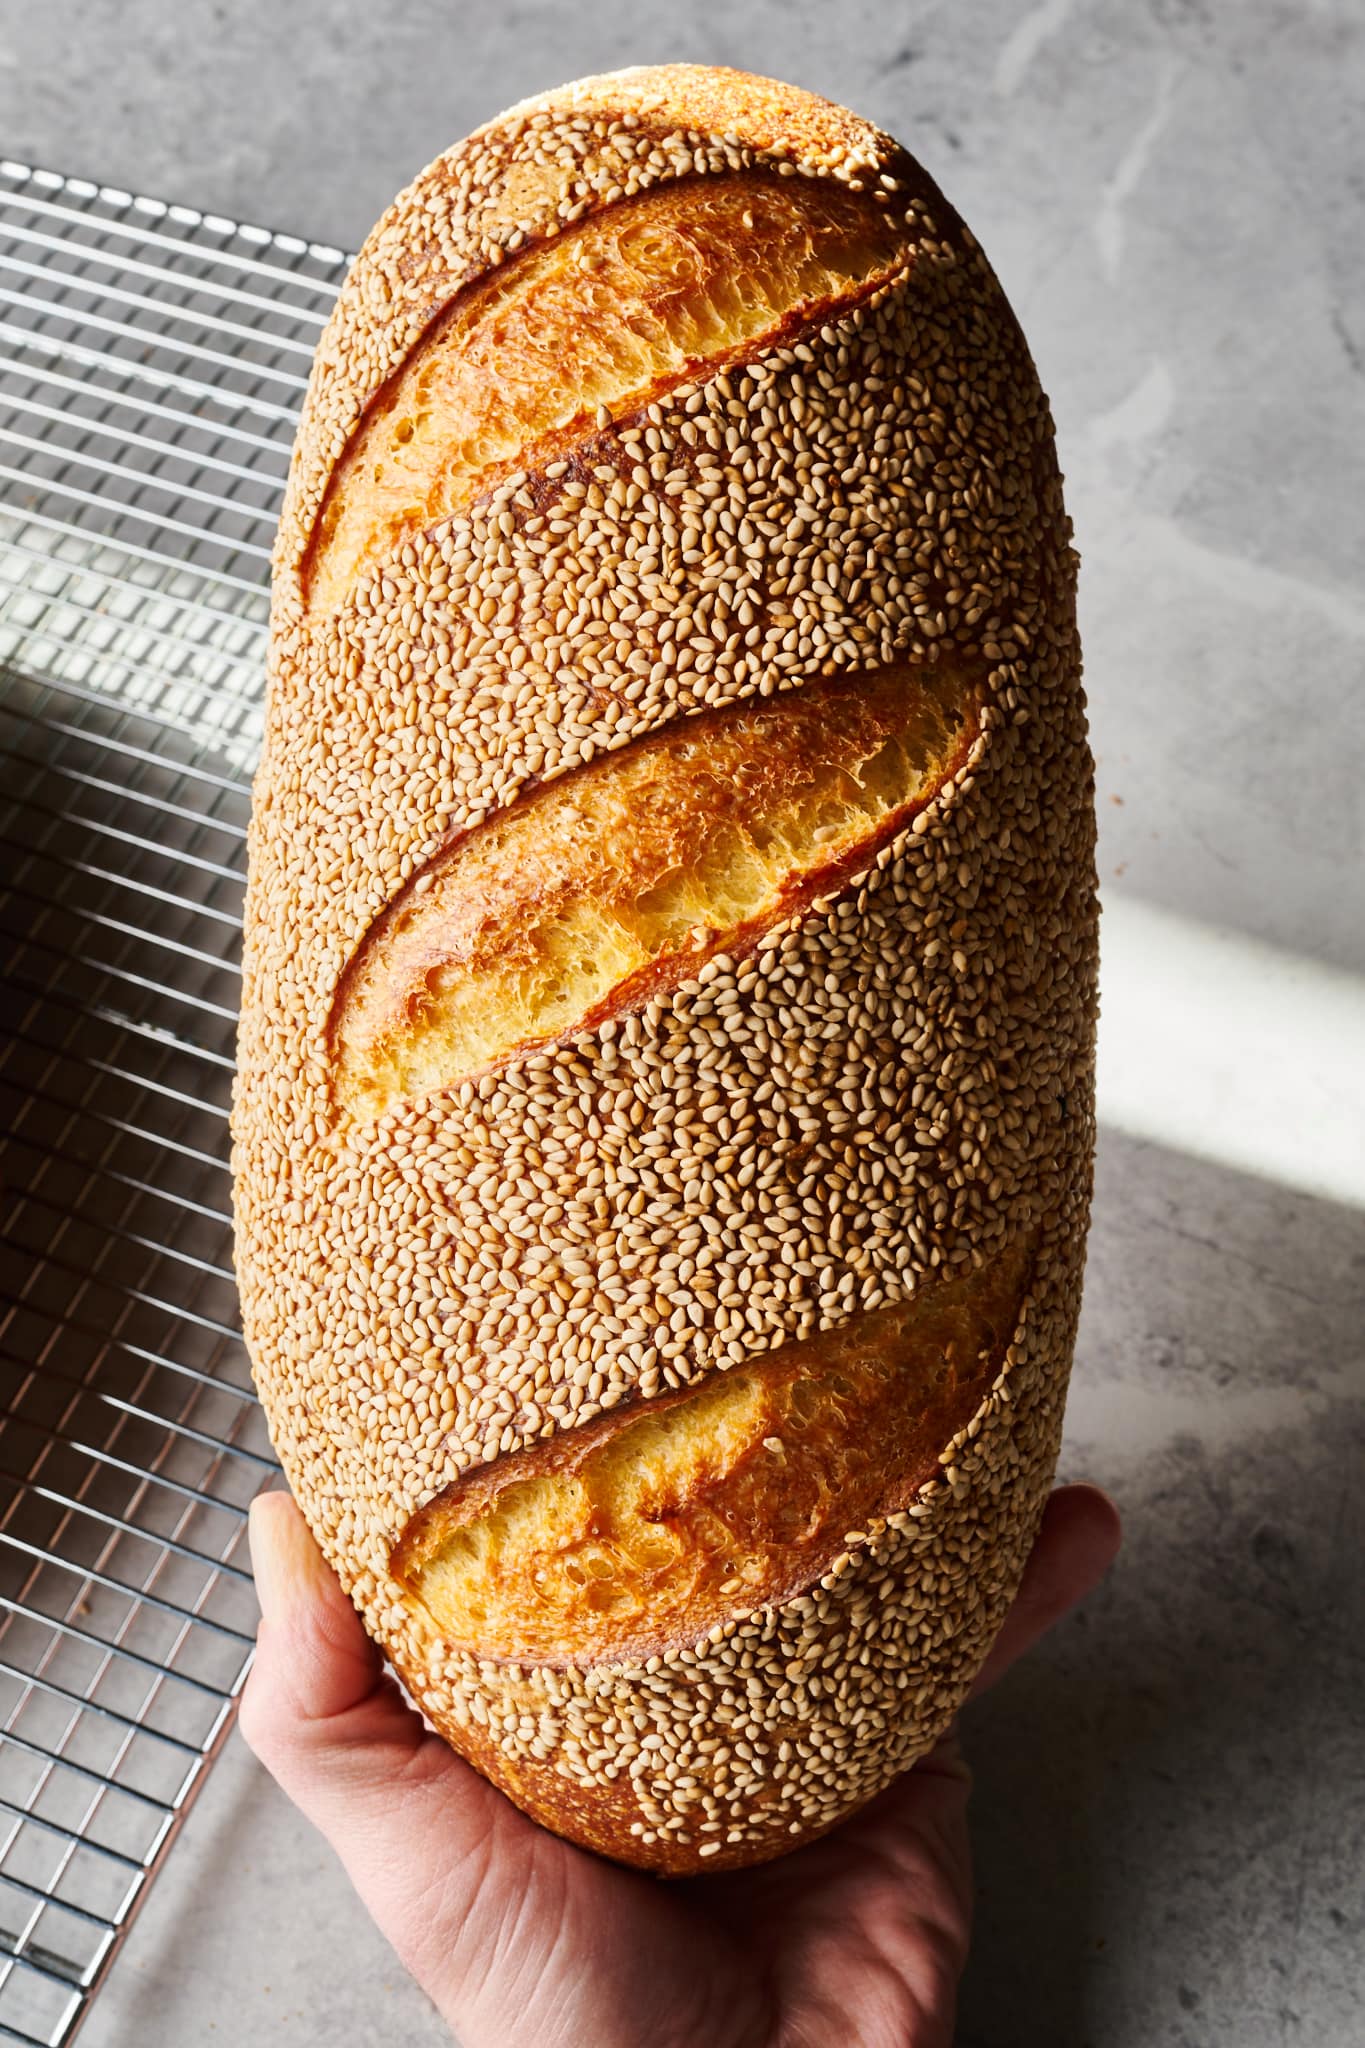 Pane Siciliano made with durum wheat and topped with sesame seeds.